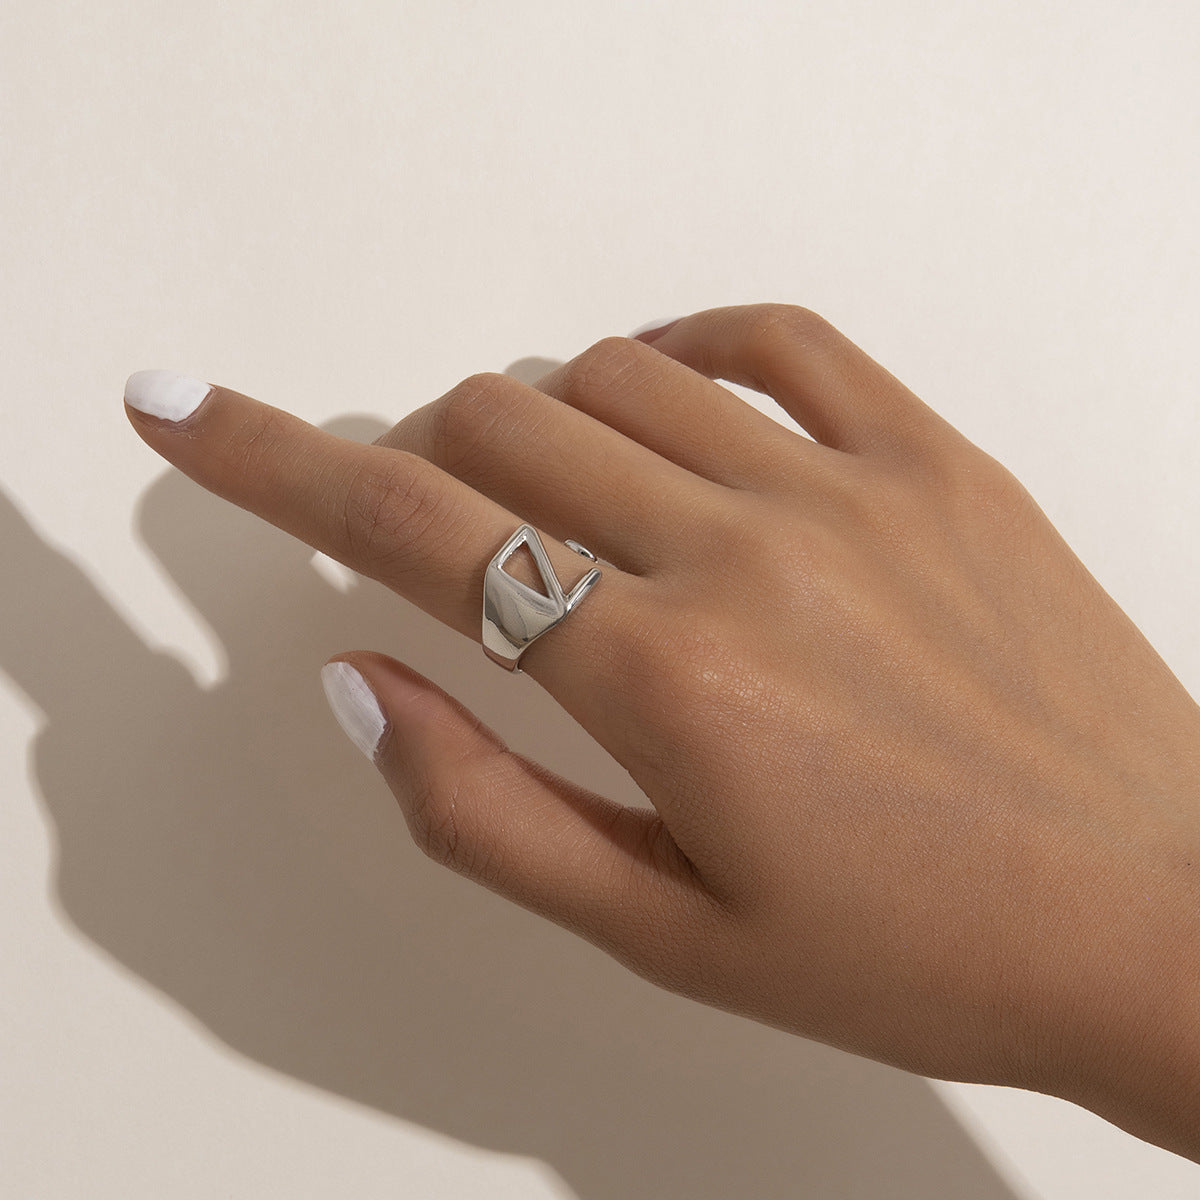 Geometric Letter Ring with Hollow Design - Adjustable Alloy Material Statement Jewelry